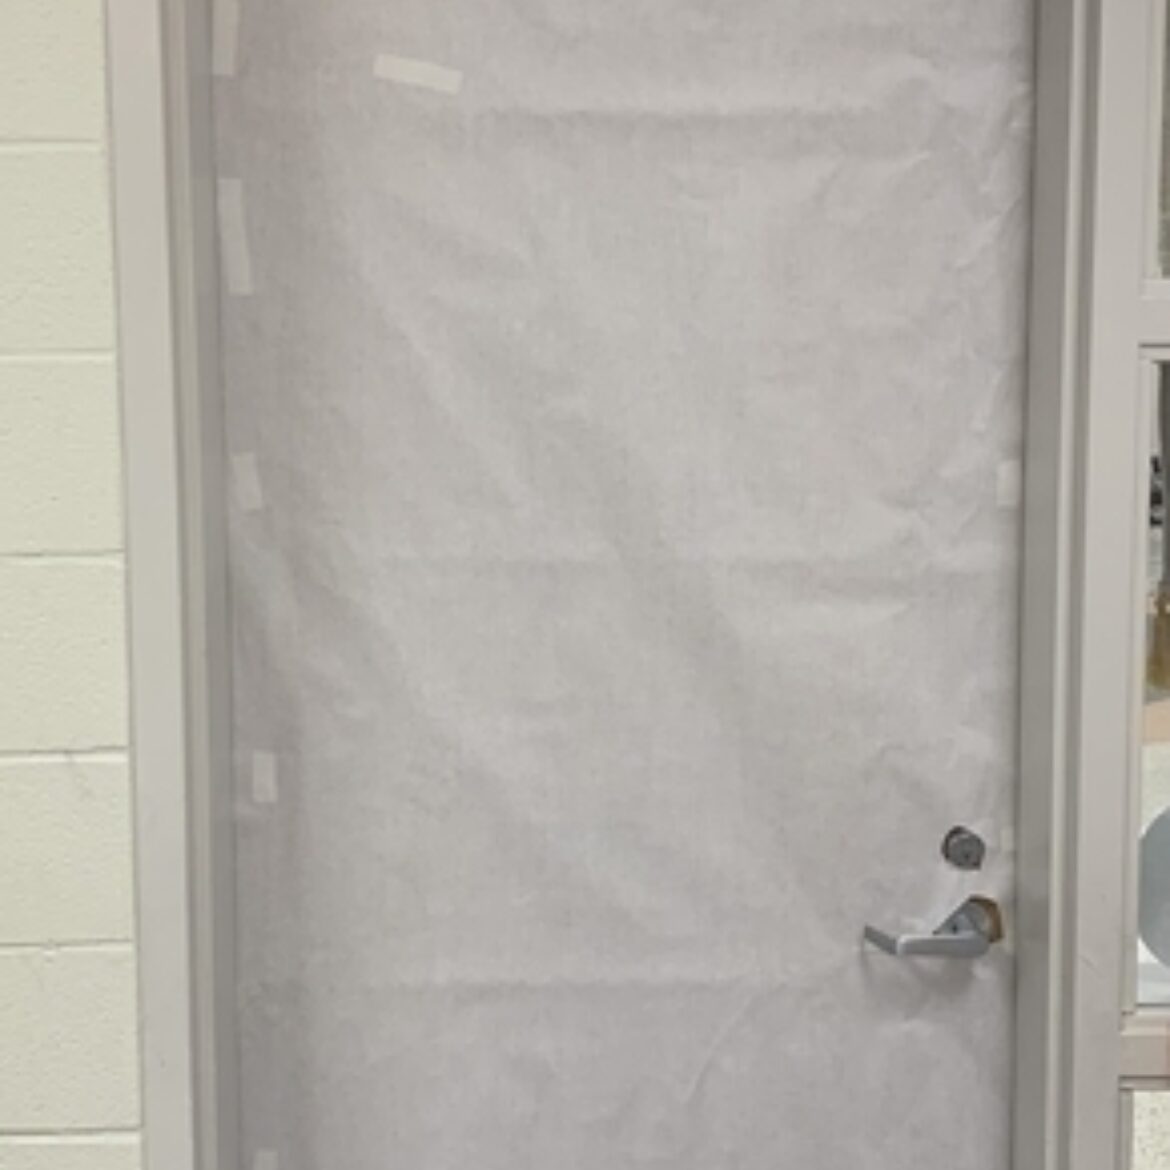 Classroom door wrapped with white paper